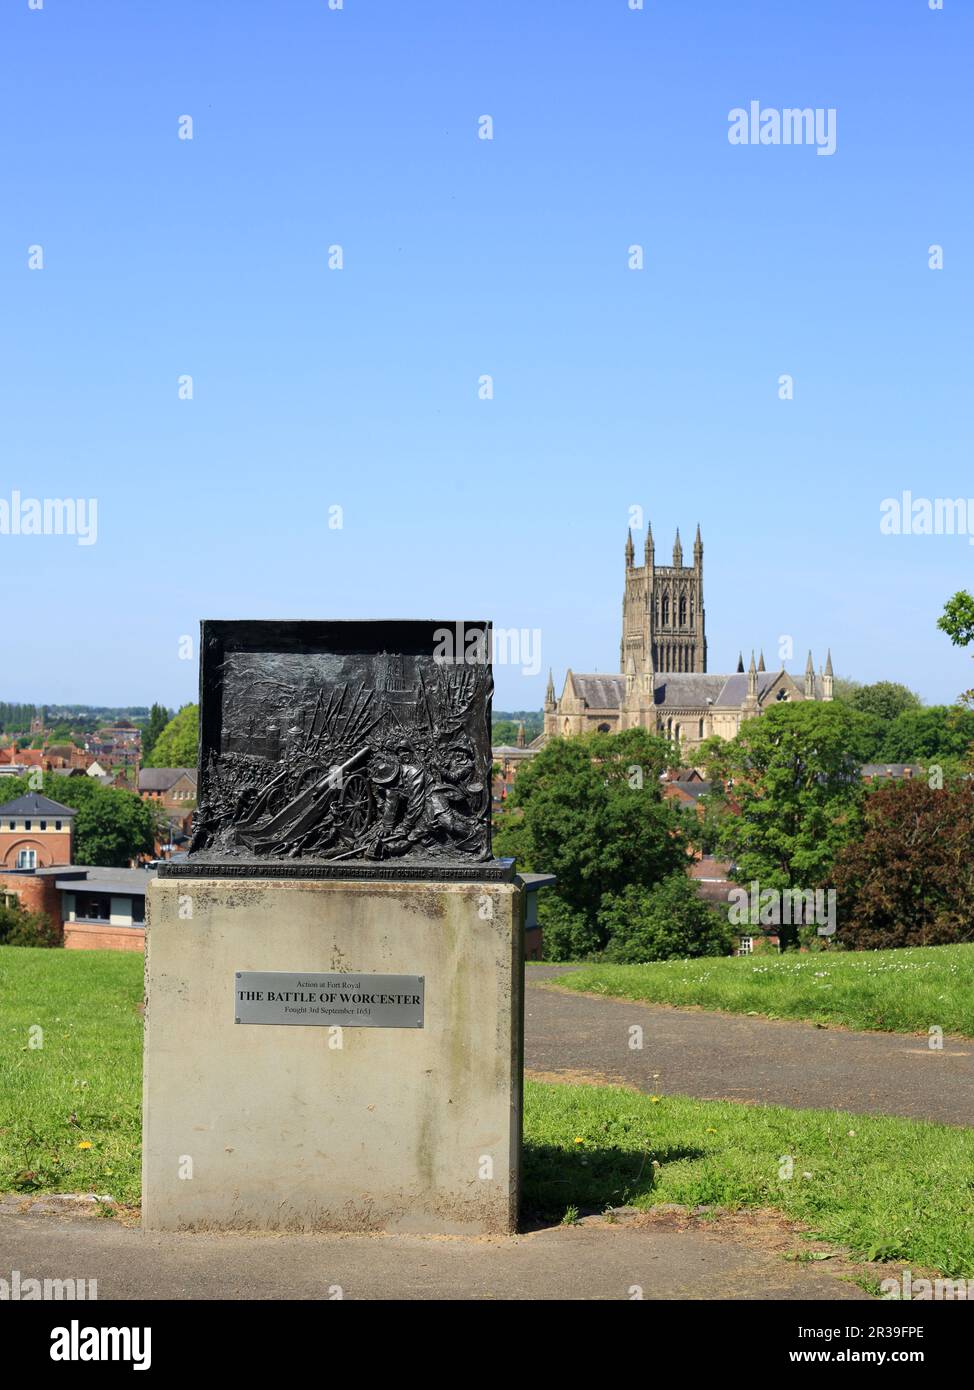 The battle of Worcester memorial at Fort royal park, Worcester, England, UK. Stock Photo